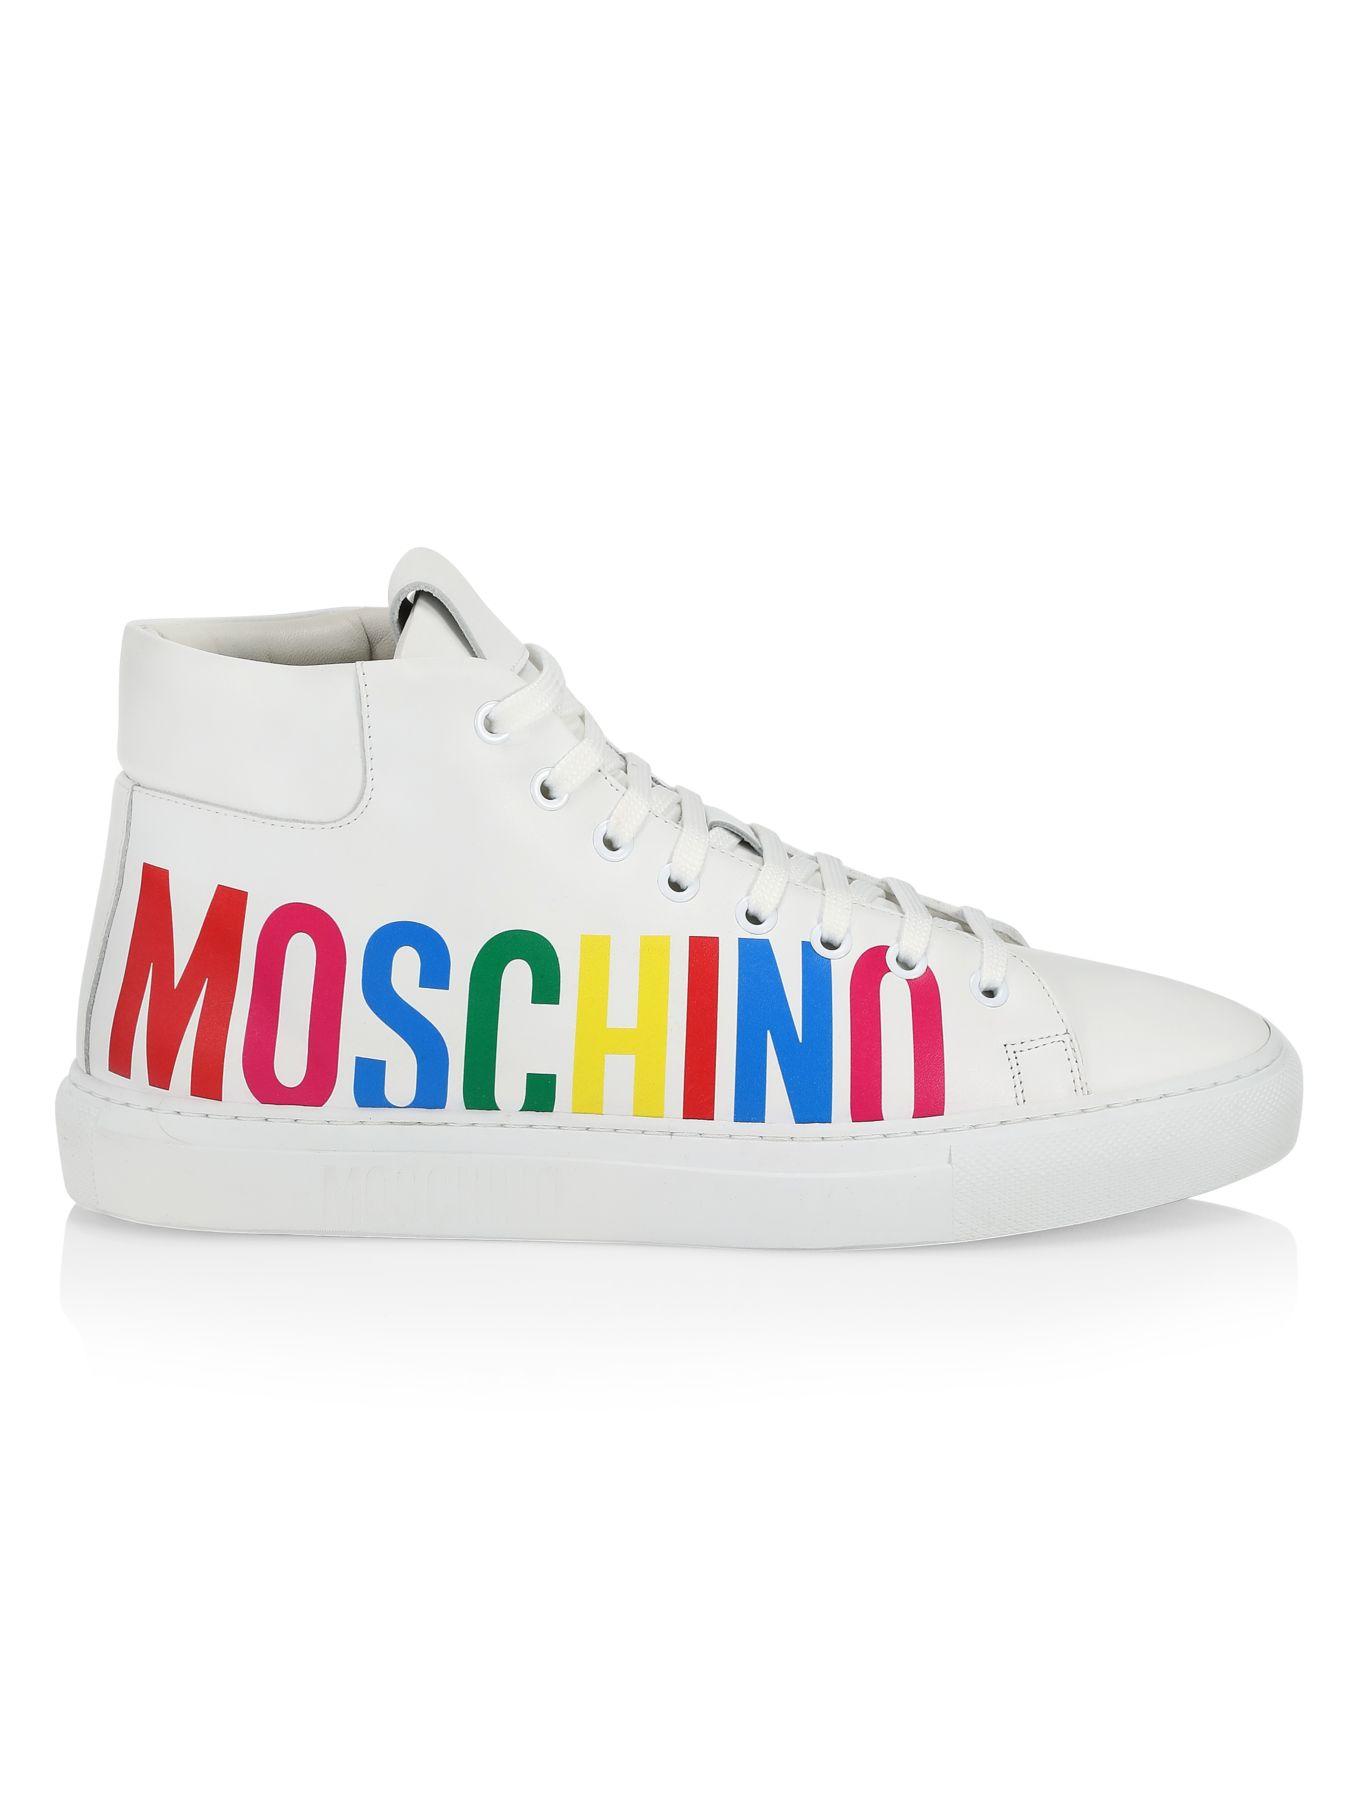 Moschino Logo High-top Leather Sneakers in White for Men - Lyst